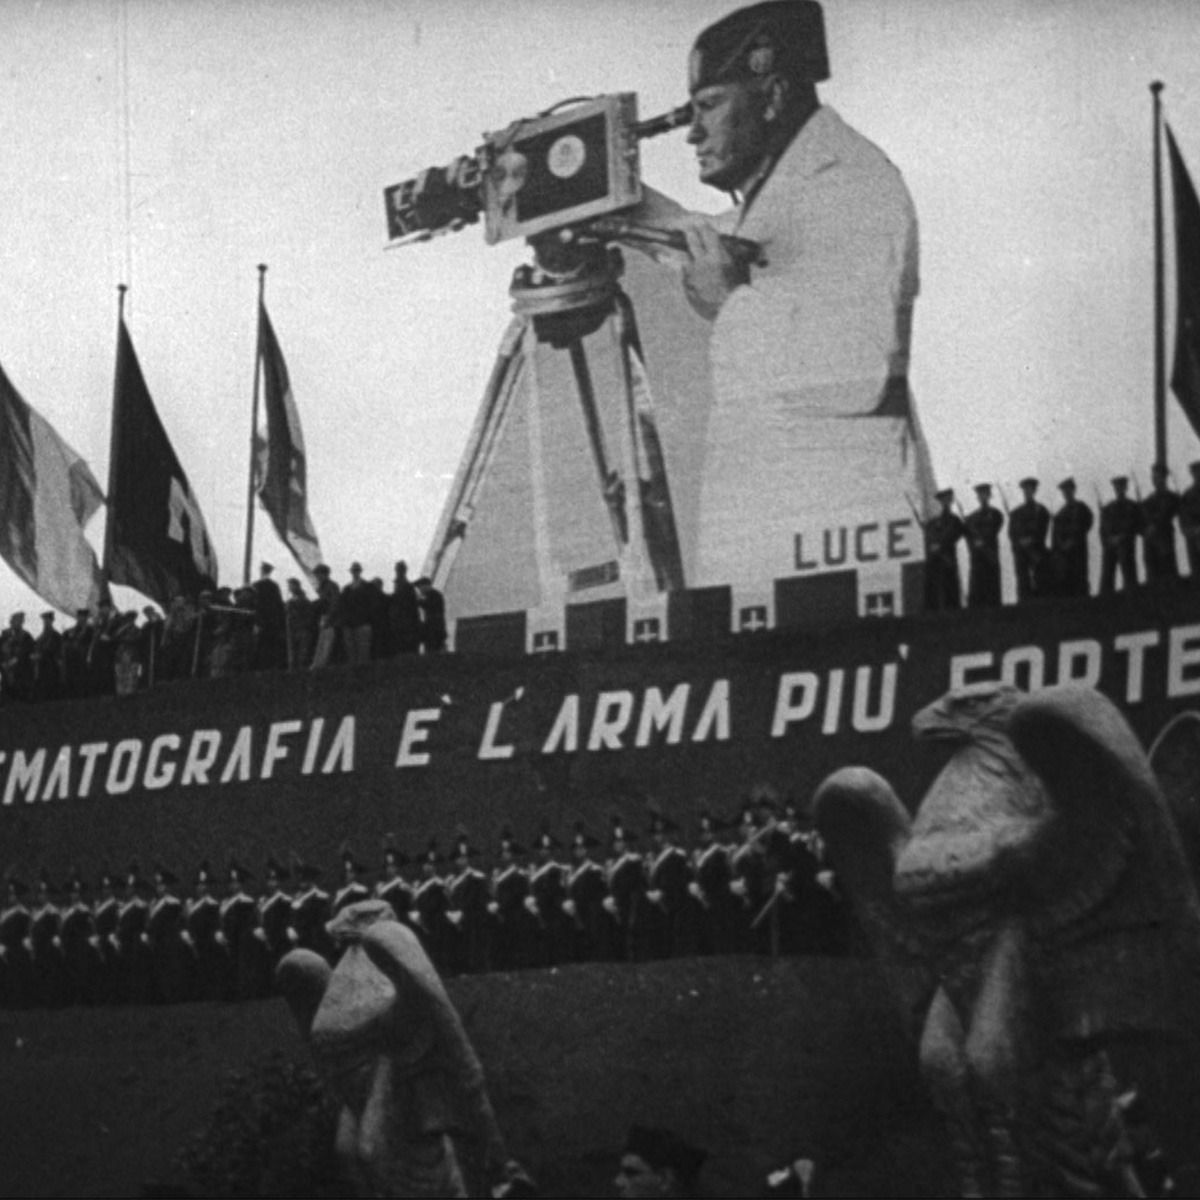 a large cutout of a man holding a camera stands over a crowd of soldiers.